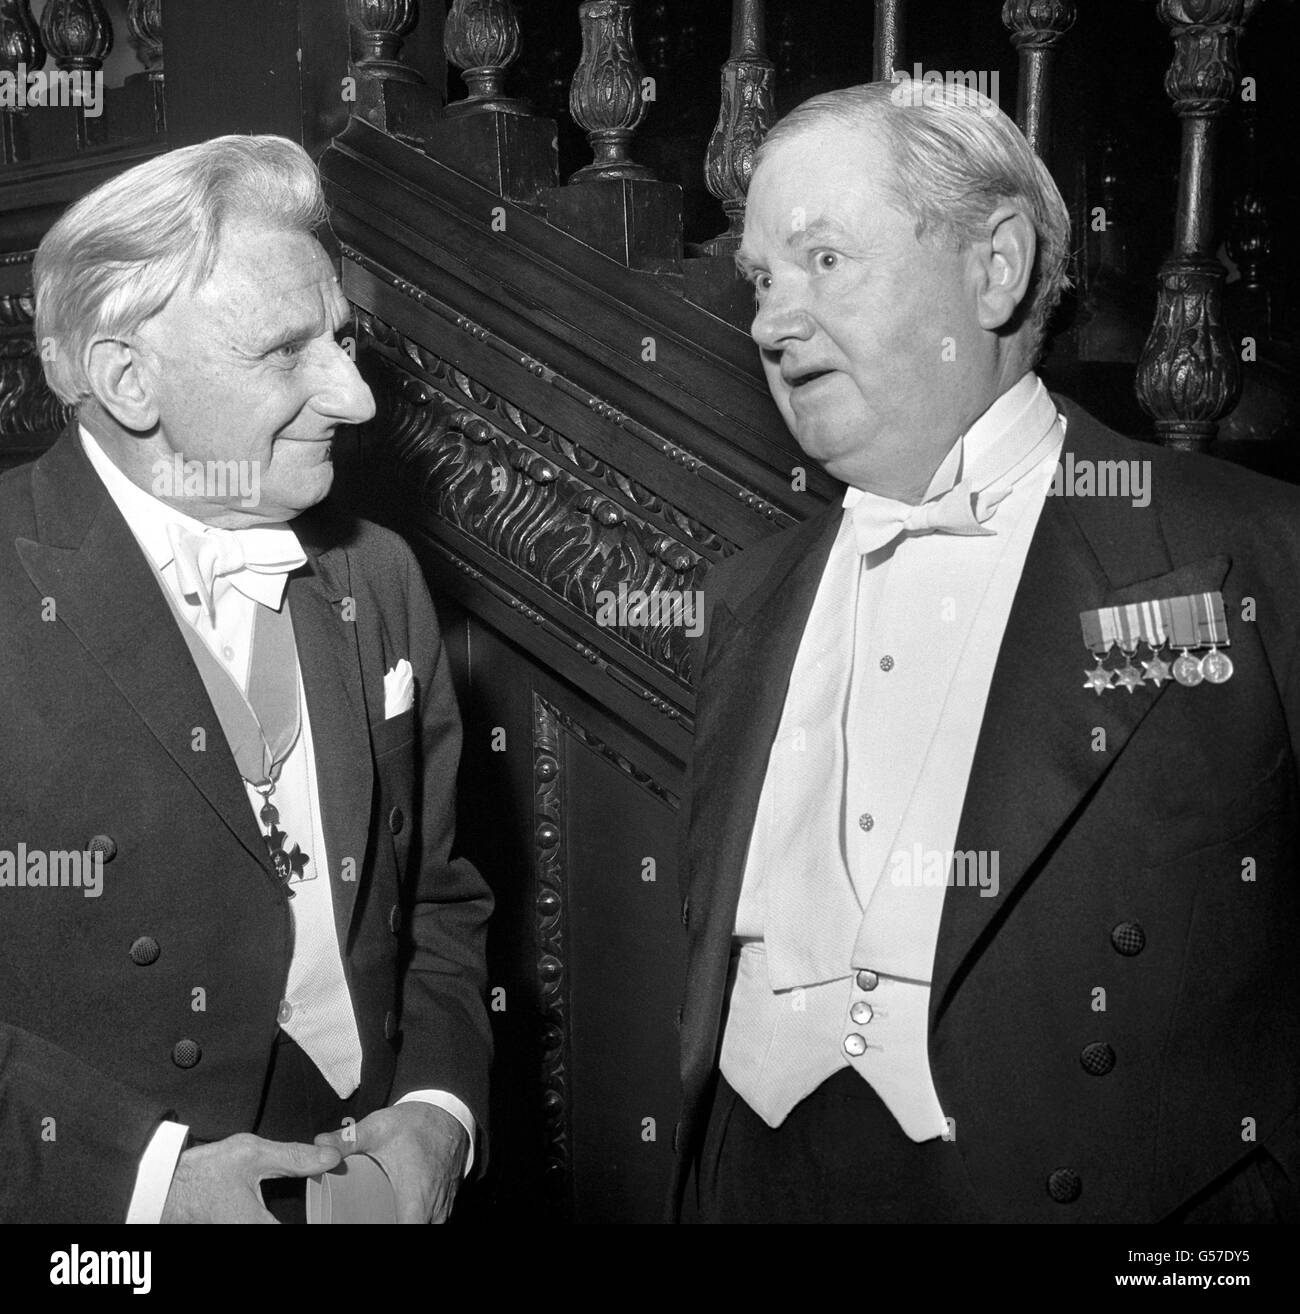 Poet Edmund Blunden (left) and author Evelyn Waugh enjoy a conversation at Skinners' Hall, London, when they received their scrolls as Companions of Literature, an honour to which they were elected by the Royal Society of Literature. Stock Photo